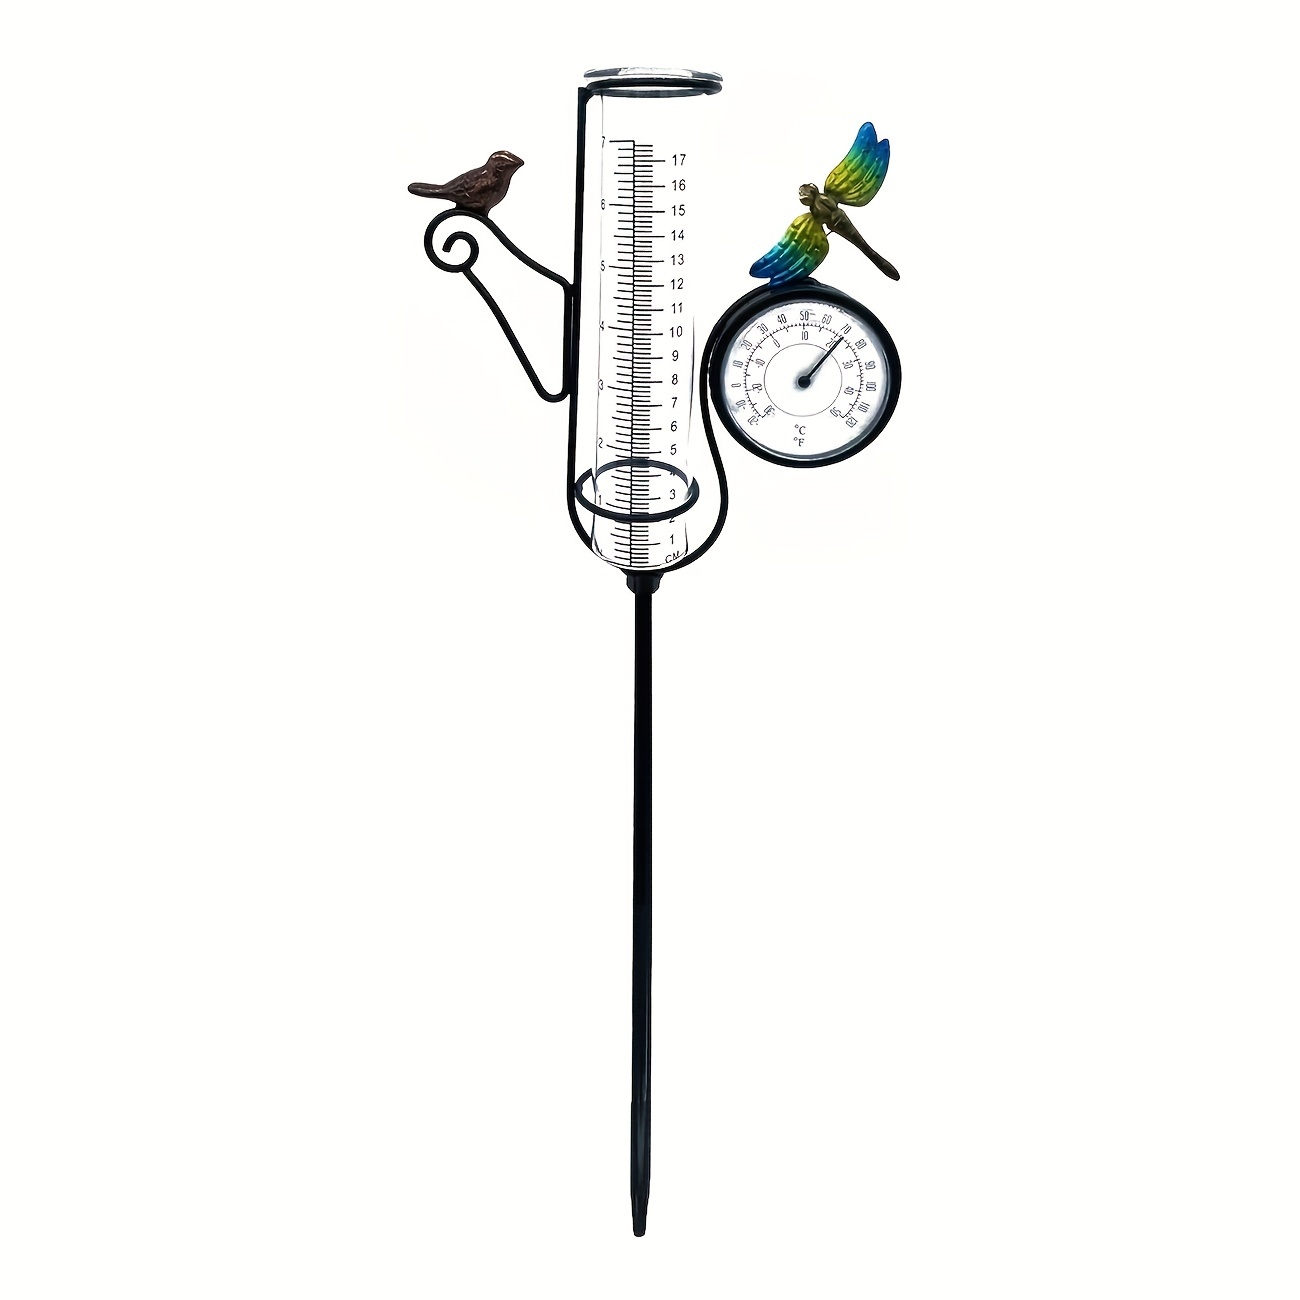 

1pc Bird & Dragonfly Art Rain Gauge Outdoor, With Thermometer 27 Inches Rain Gauge, Metal Frame Accurate Rain Gages Outdoors Large Numbers, Suitable For Garden, Courtyard, Lawn Decoration